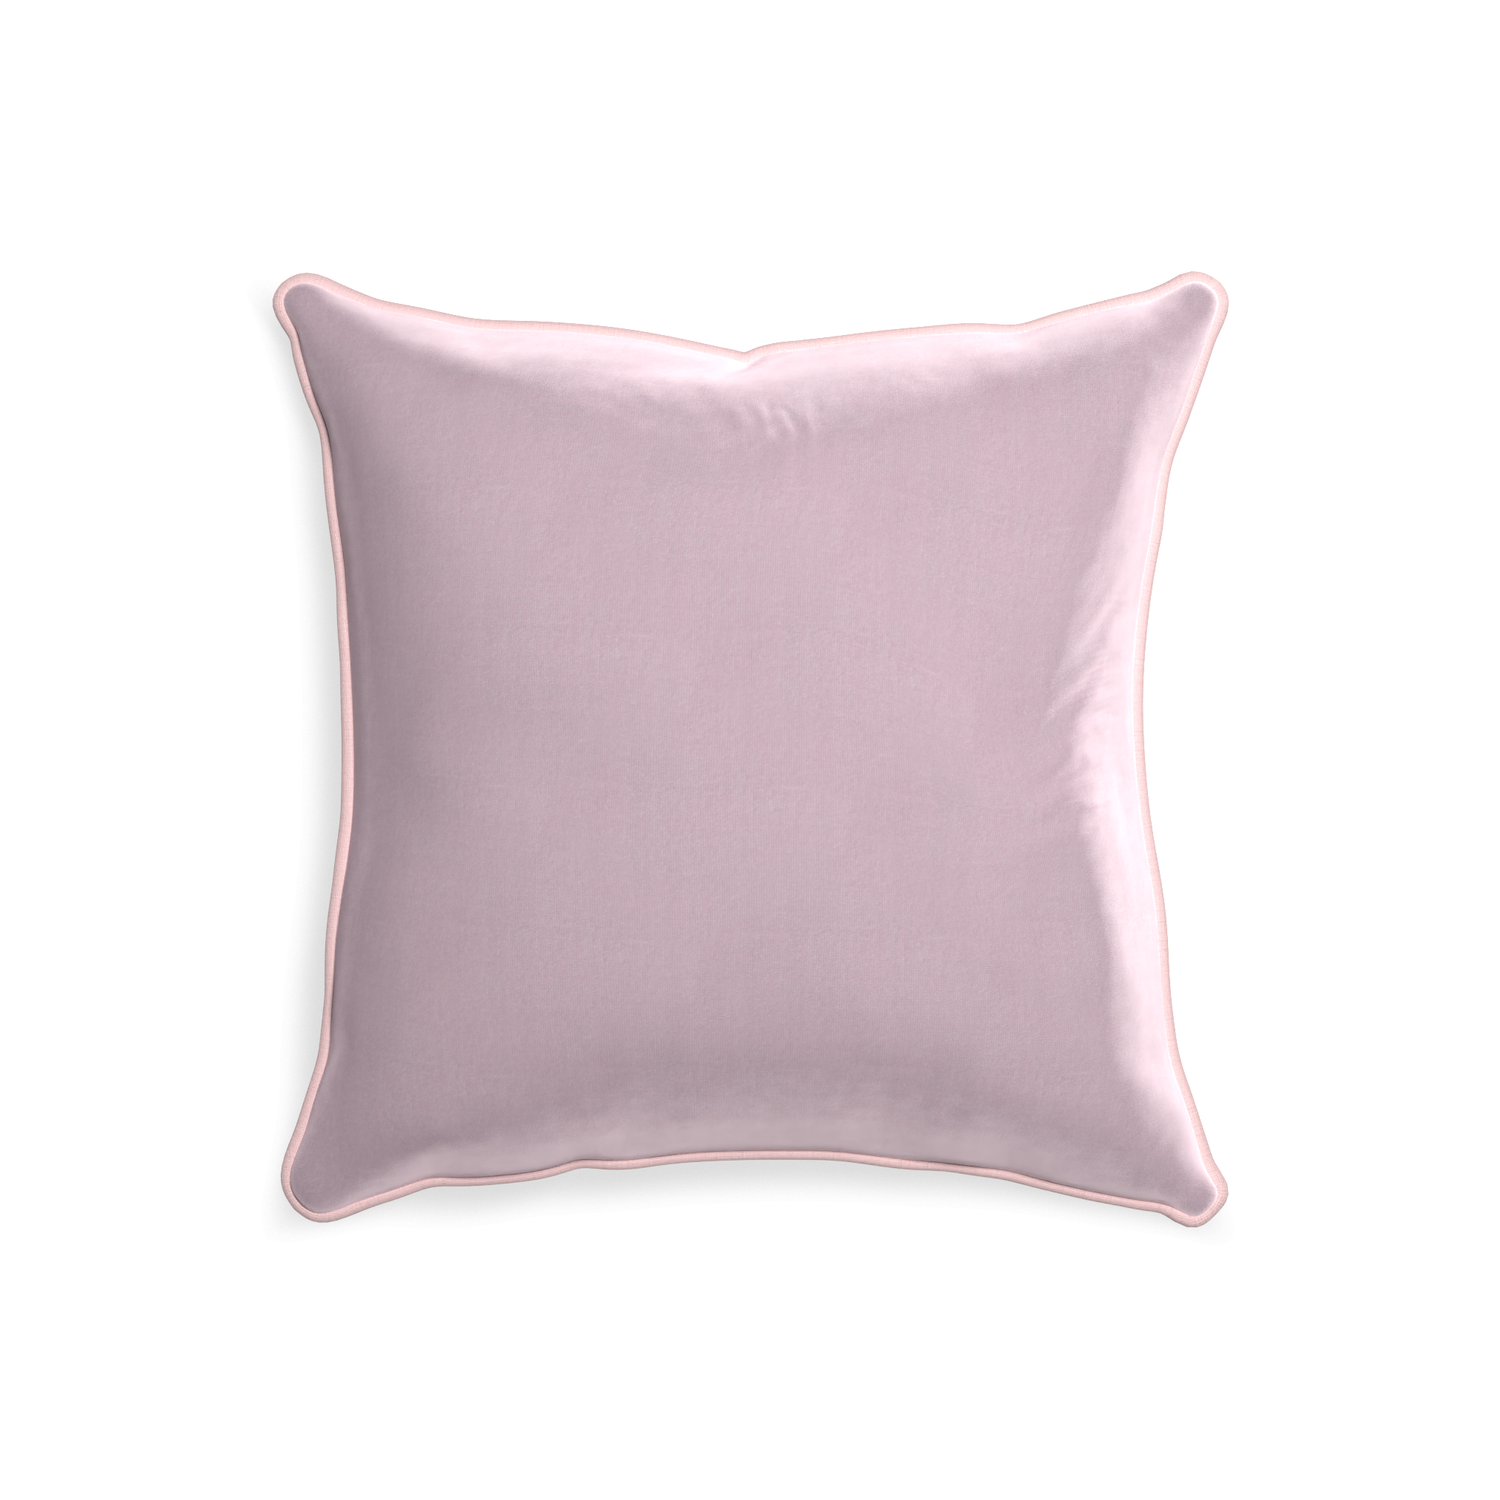 20-square lilac velvet custom pillow with petal piping on white background